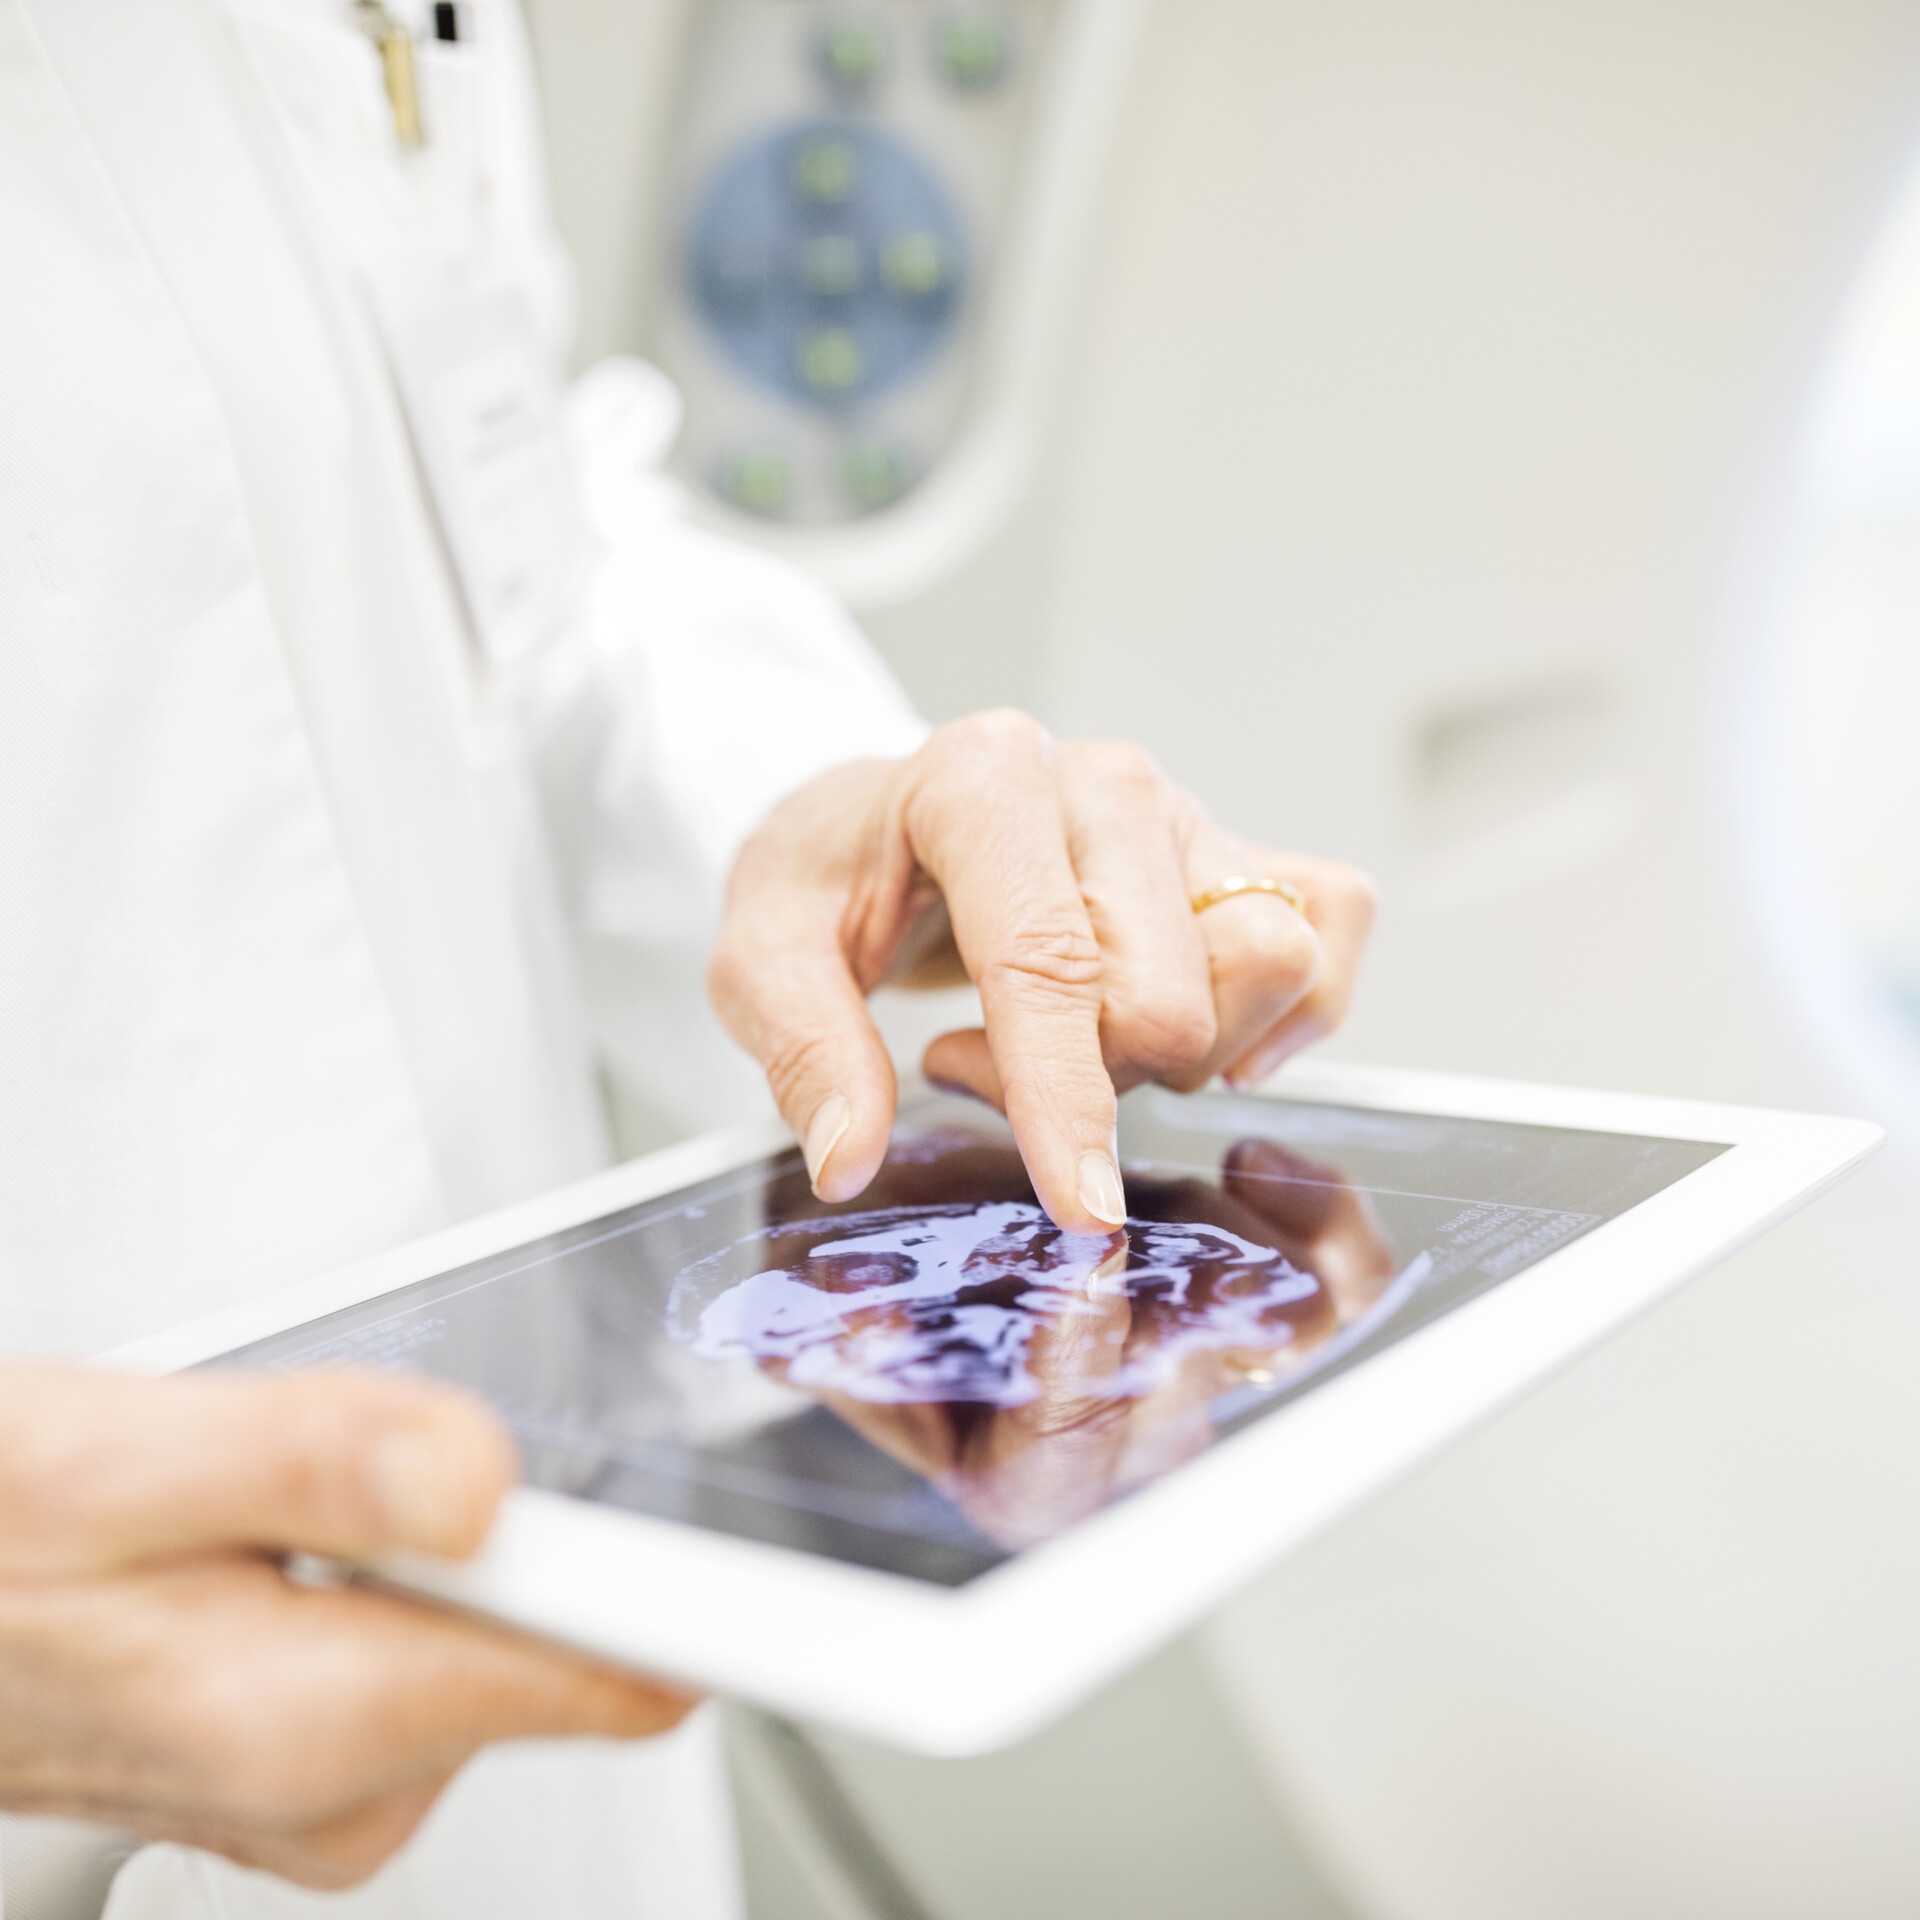 X-ray image analysis on tablet